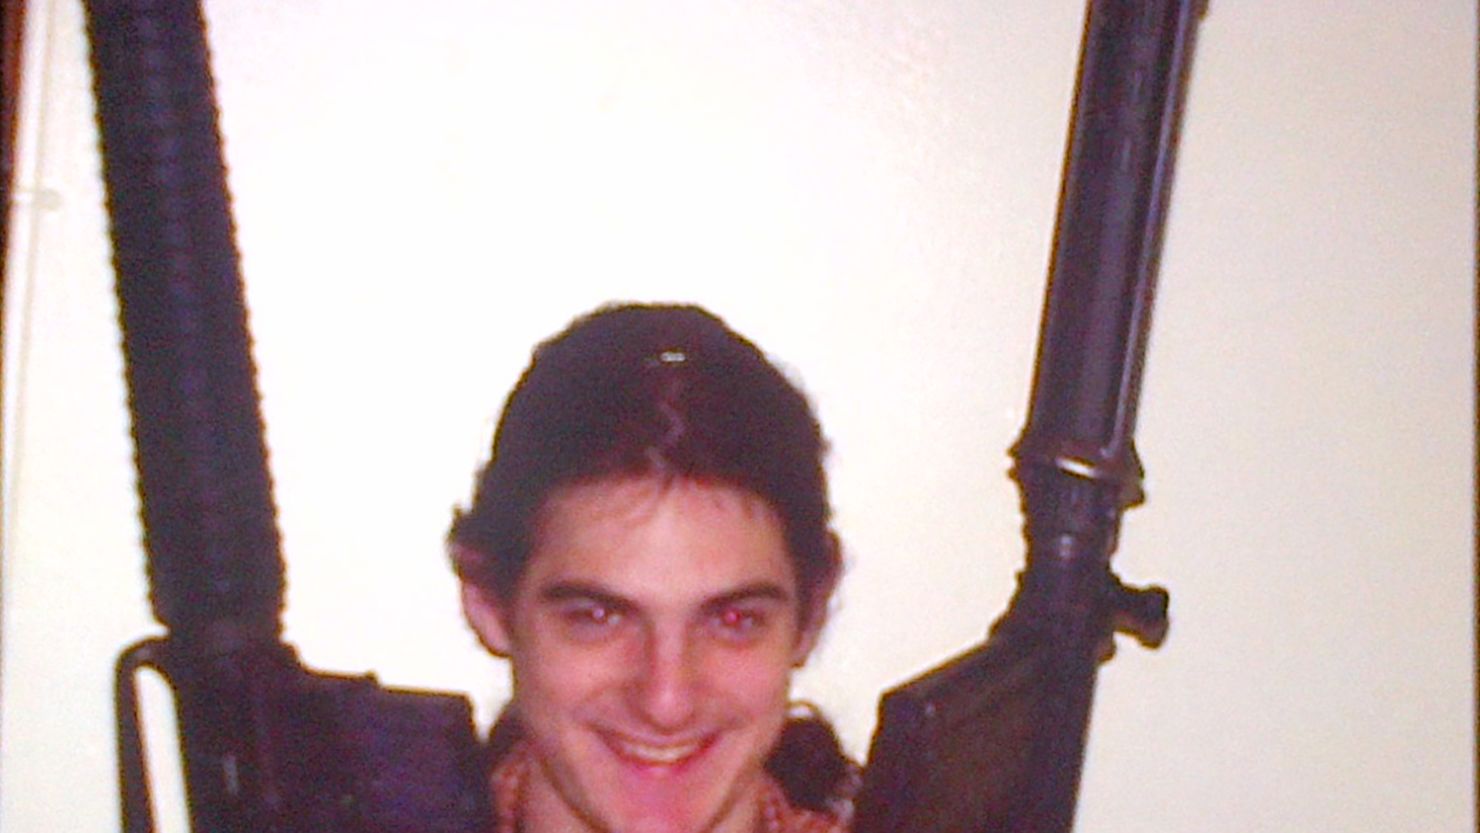 A photo shows suspect Aaron Greene posing with two guns. 